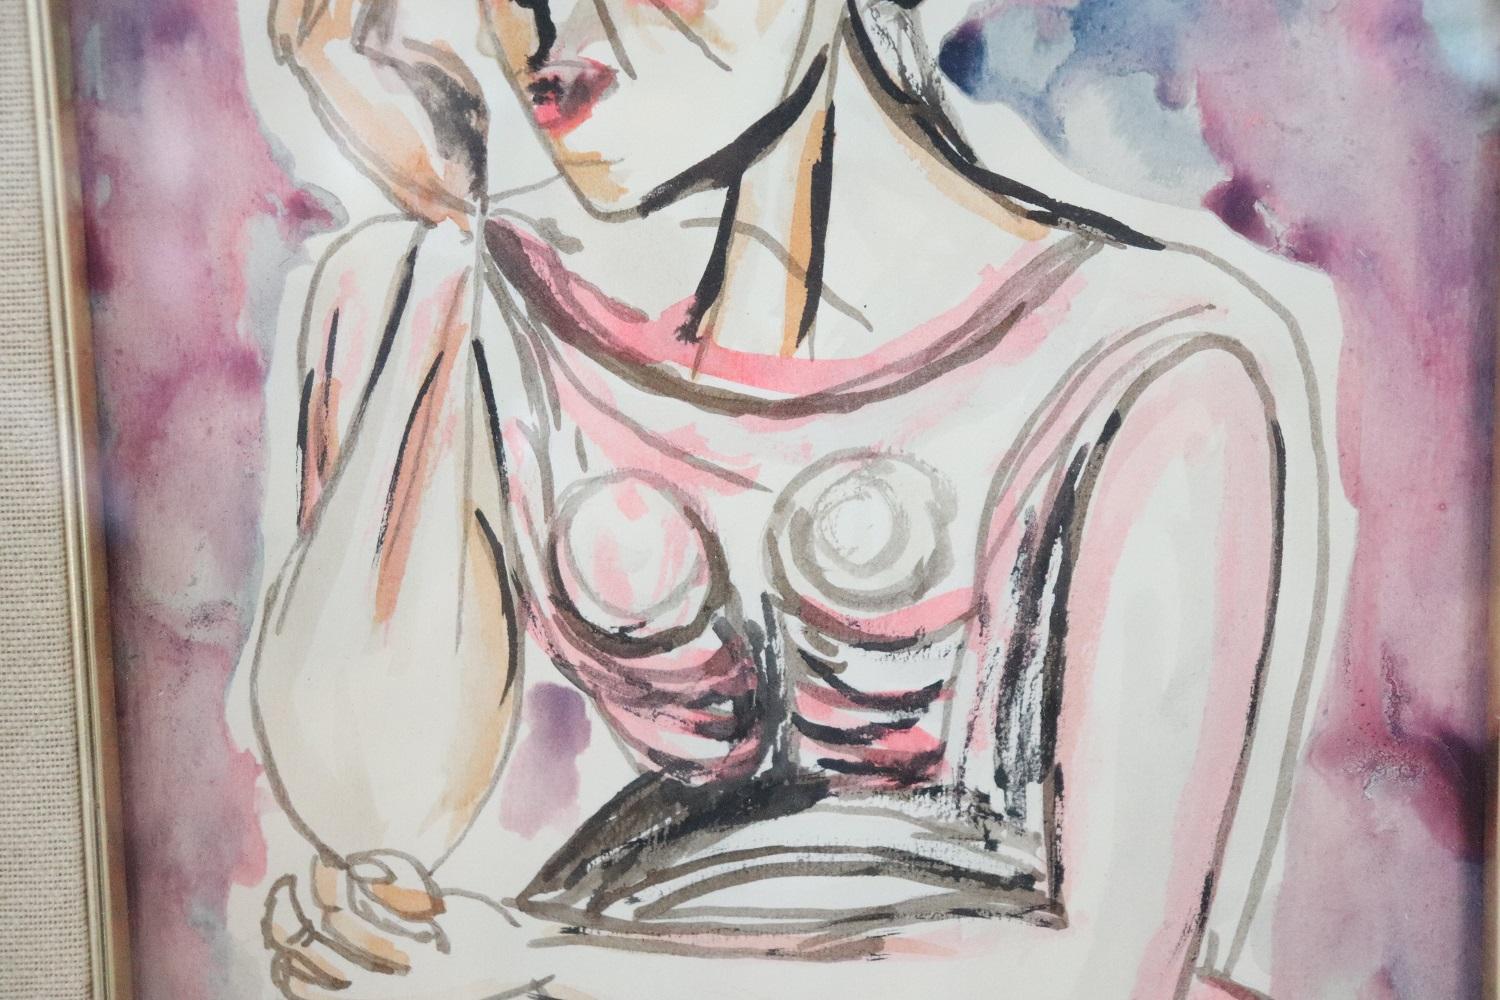 Mid-20th Century Italian Watercolor on Paper by Migneco Giuseppe, Woman Portrait For Sale